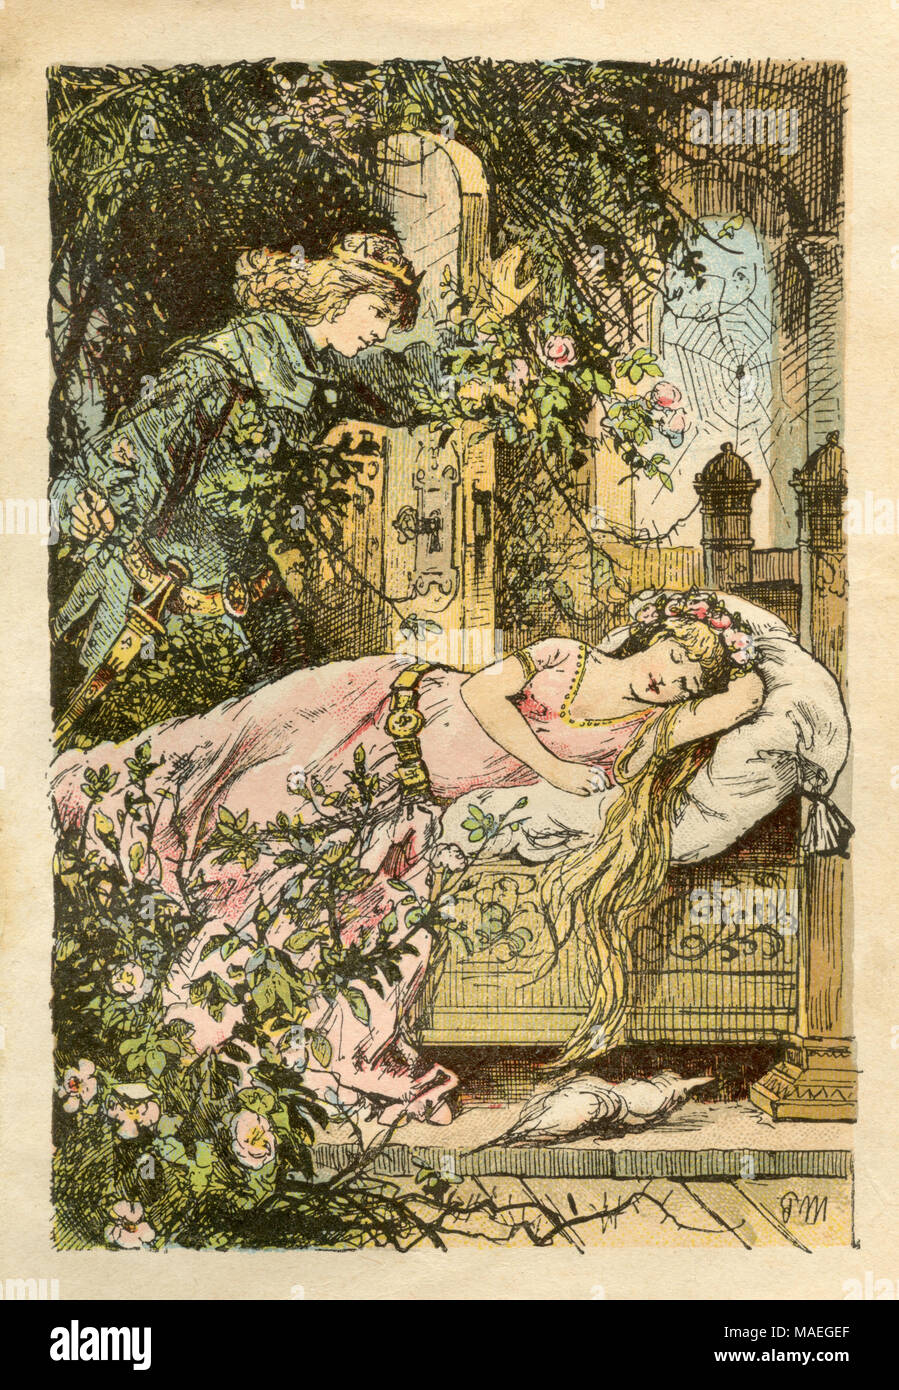 Sleeping Beauty. The Prince comes through the thorn hedge and finds the sleeping girl. Grimm's Fairytales, Paul Meyerheim, created 1870 (ca.), published 1907 Stock Photo